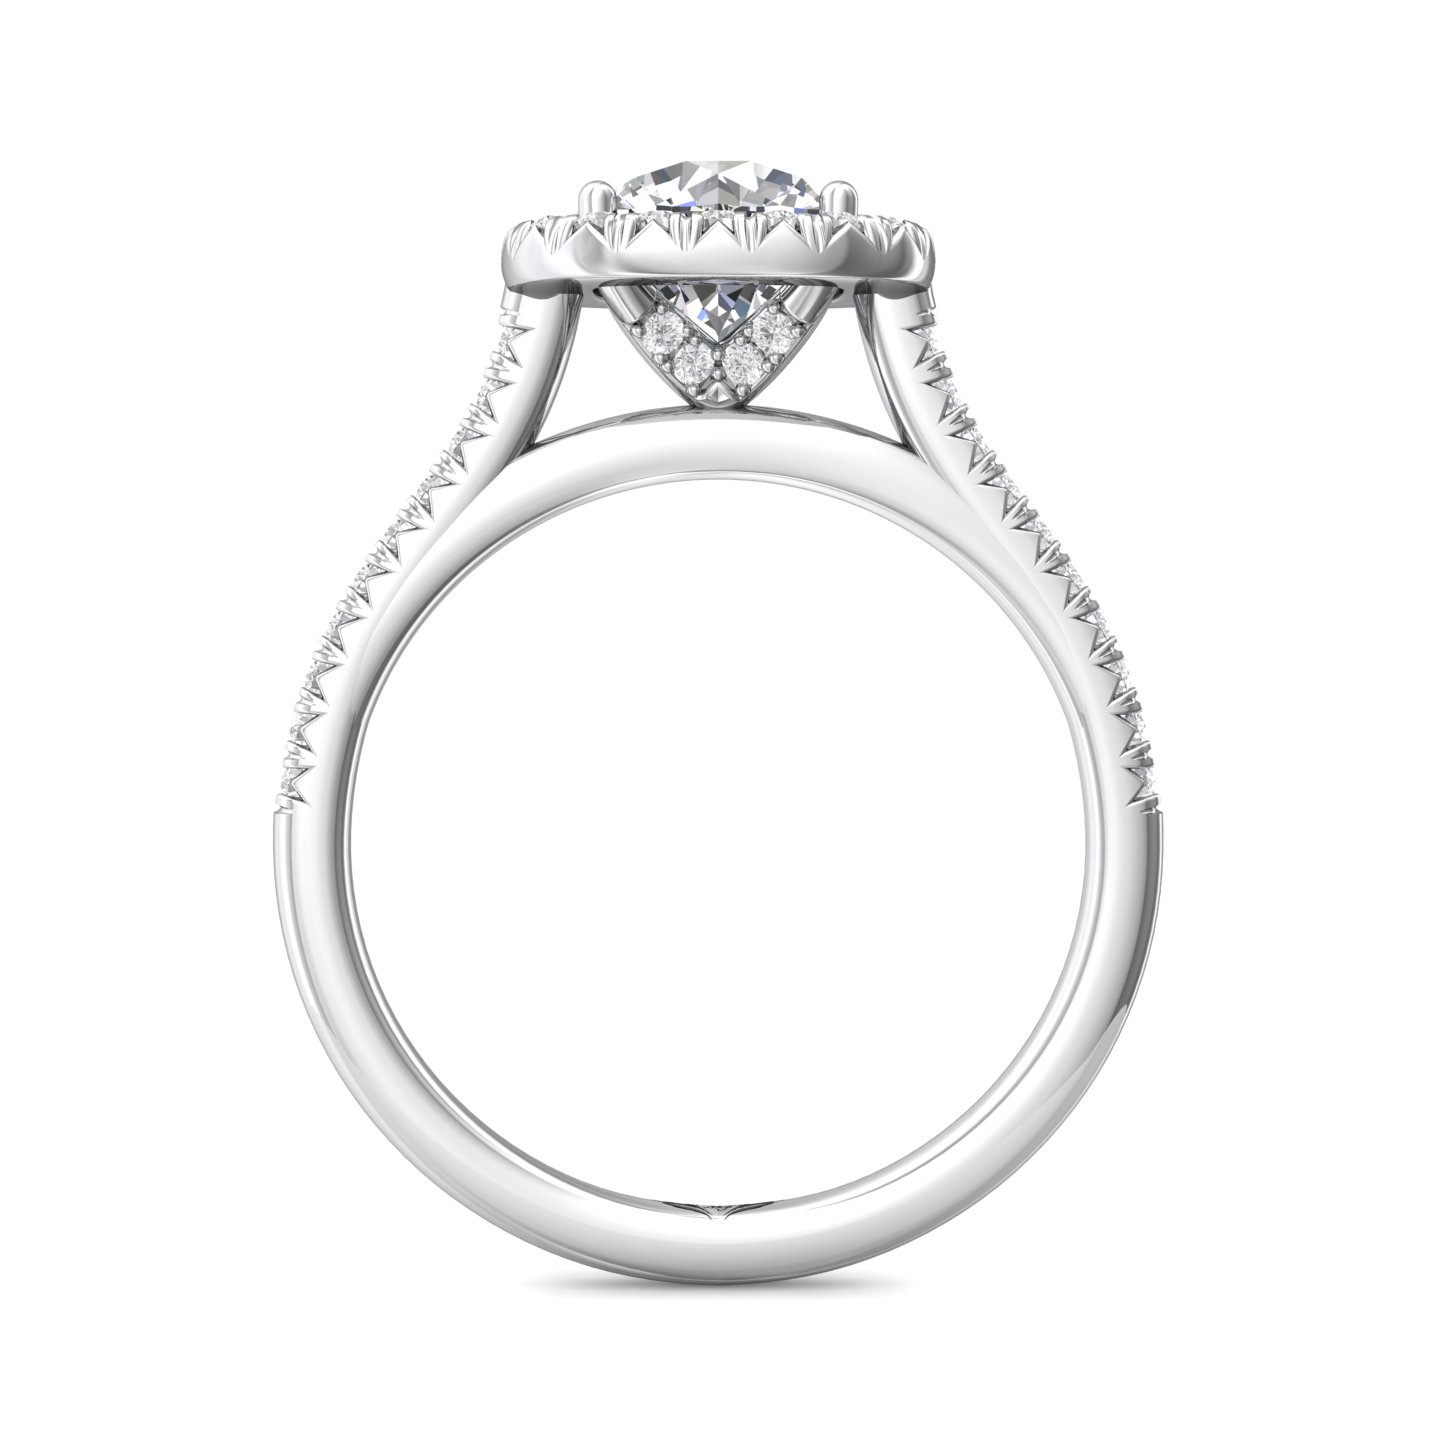 14K White Gold FlyerFit Micropave Halo Engagement Ring Image 2 Christopher's Fine Jewelry Pawleys Island, SC